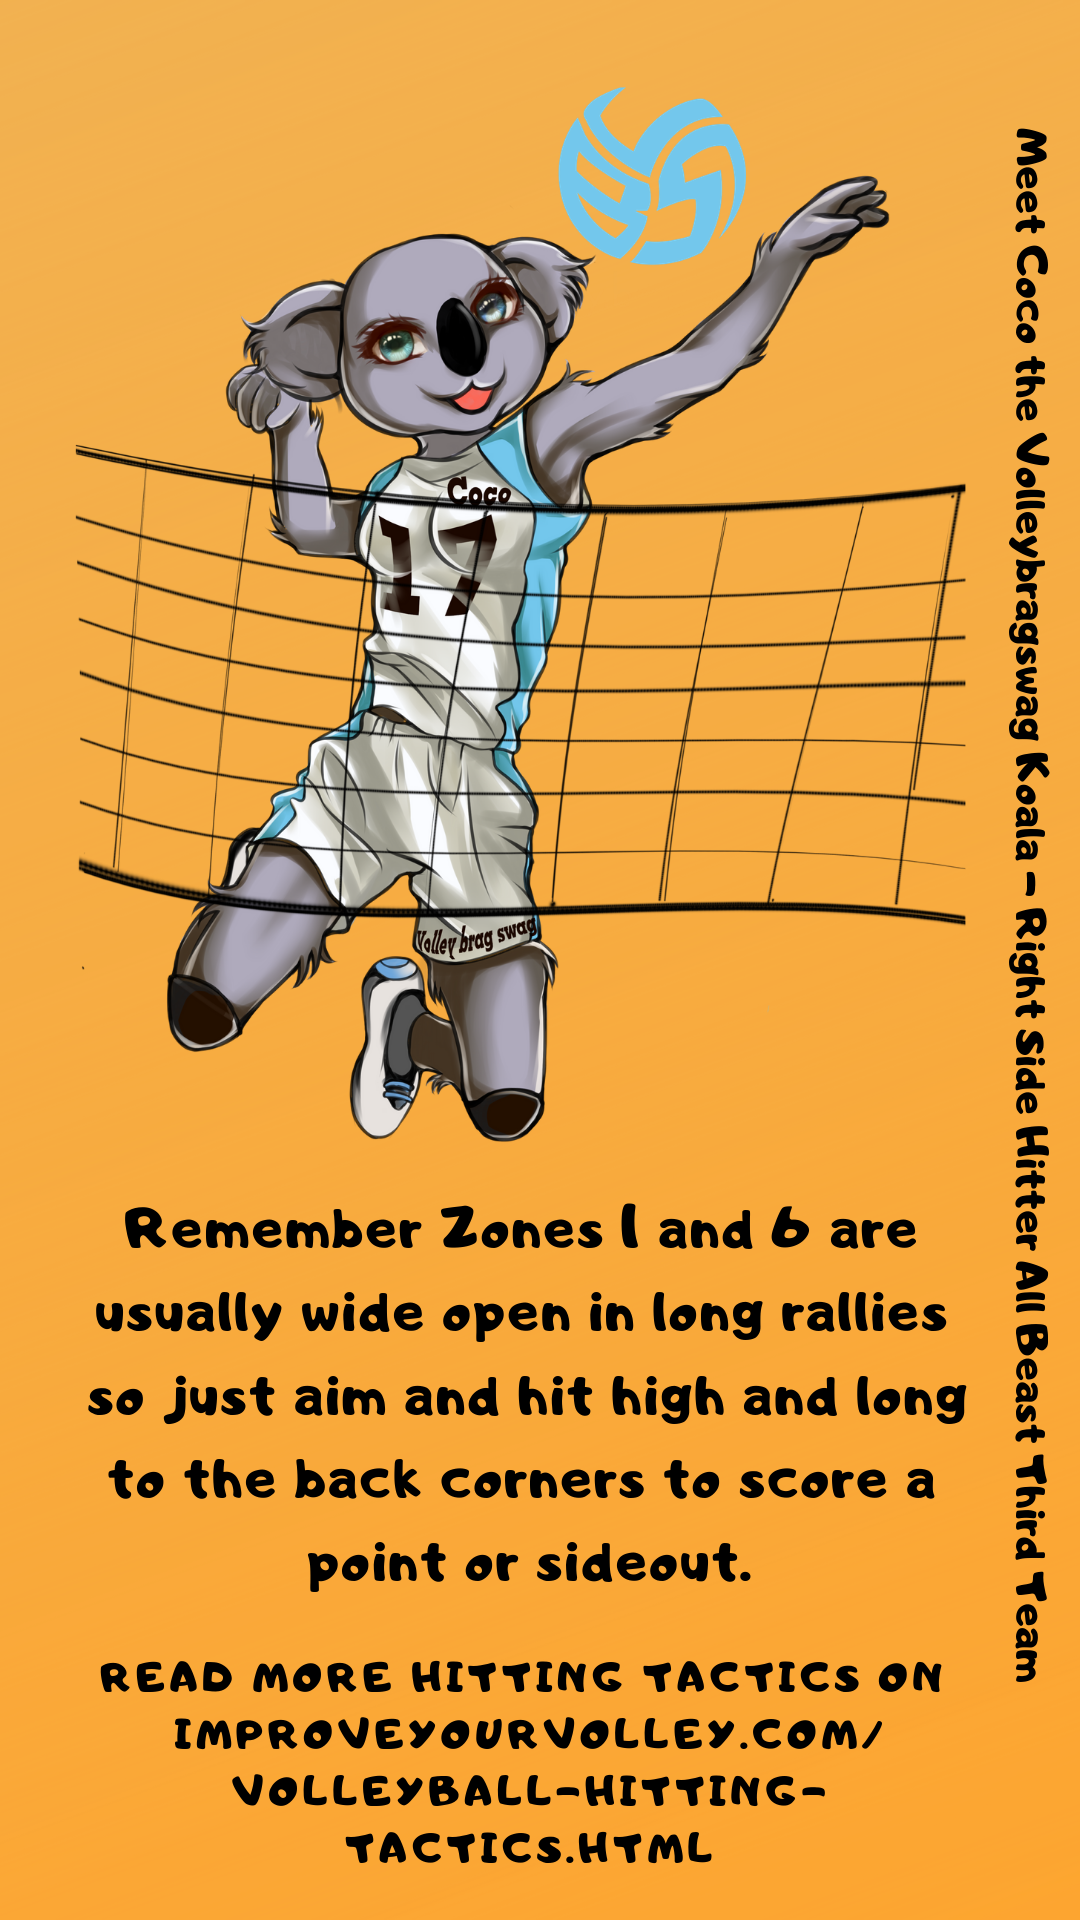 Hitting Tactics: Remember Zone 1 and 6 are often open during long rallies.